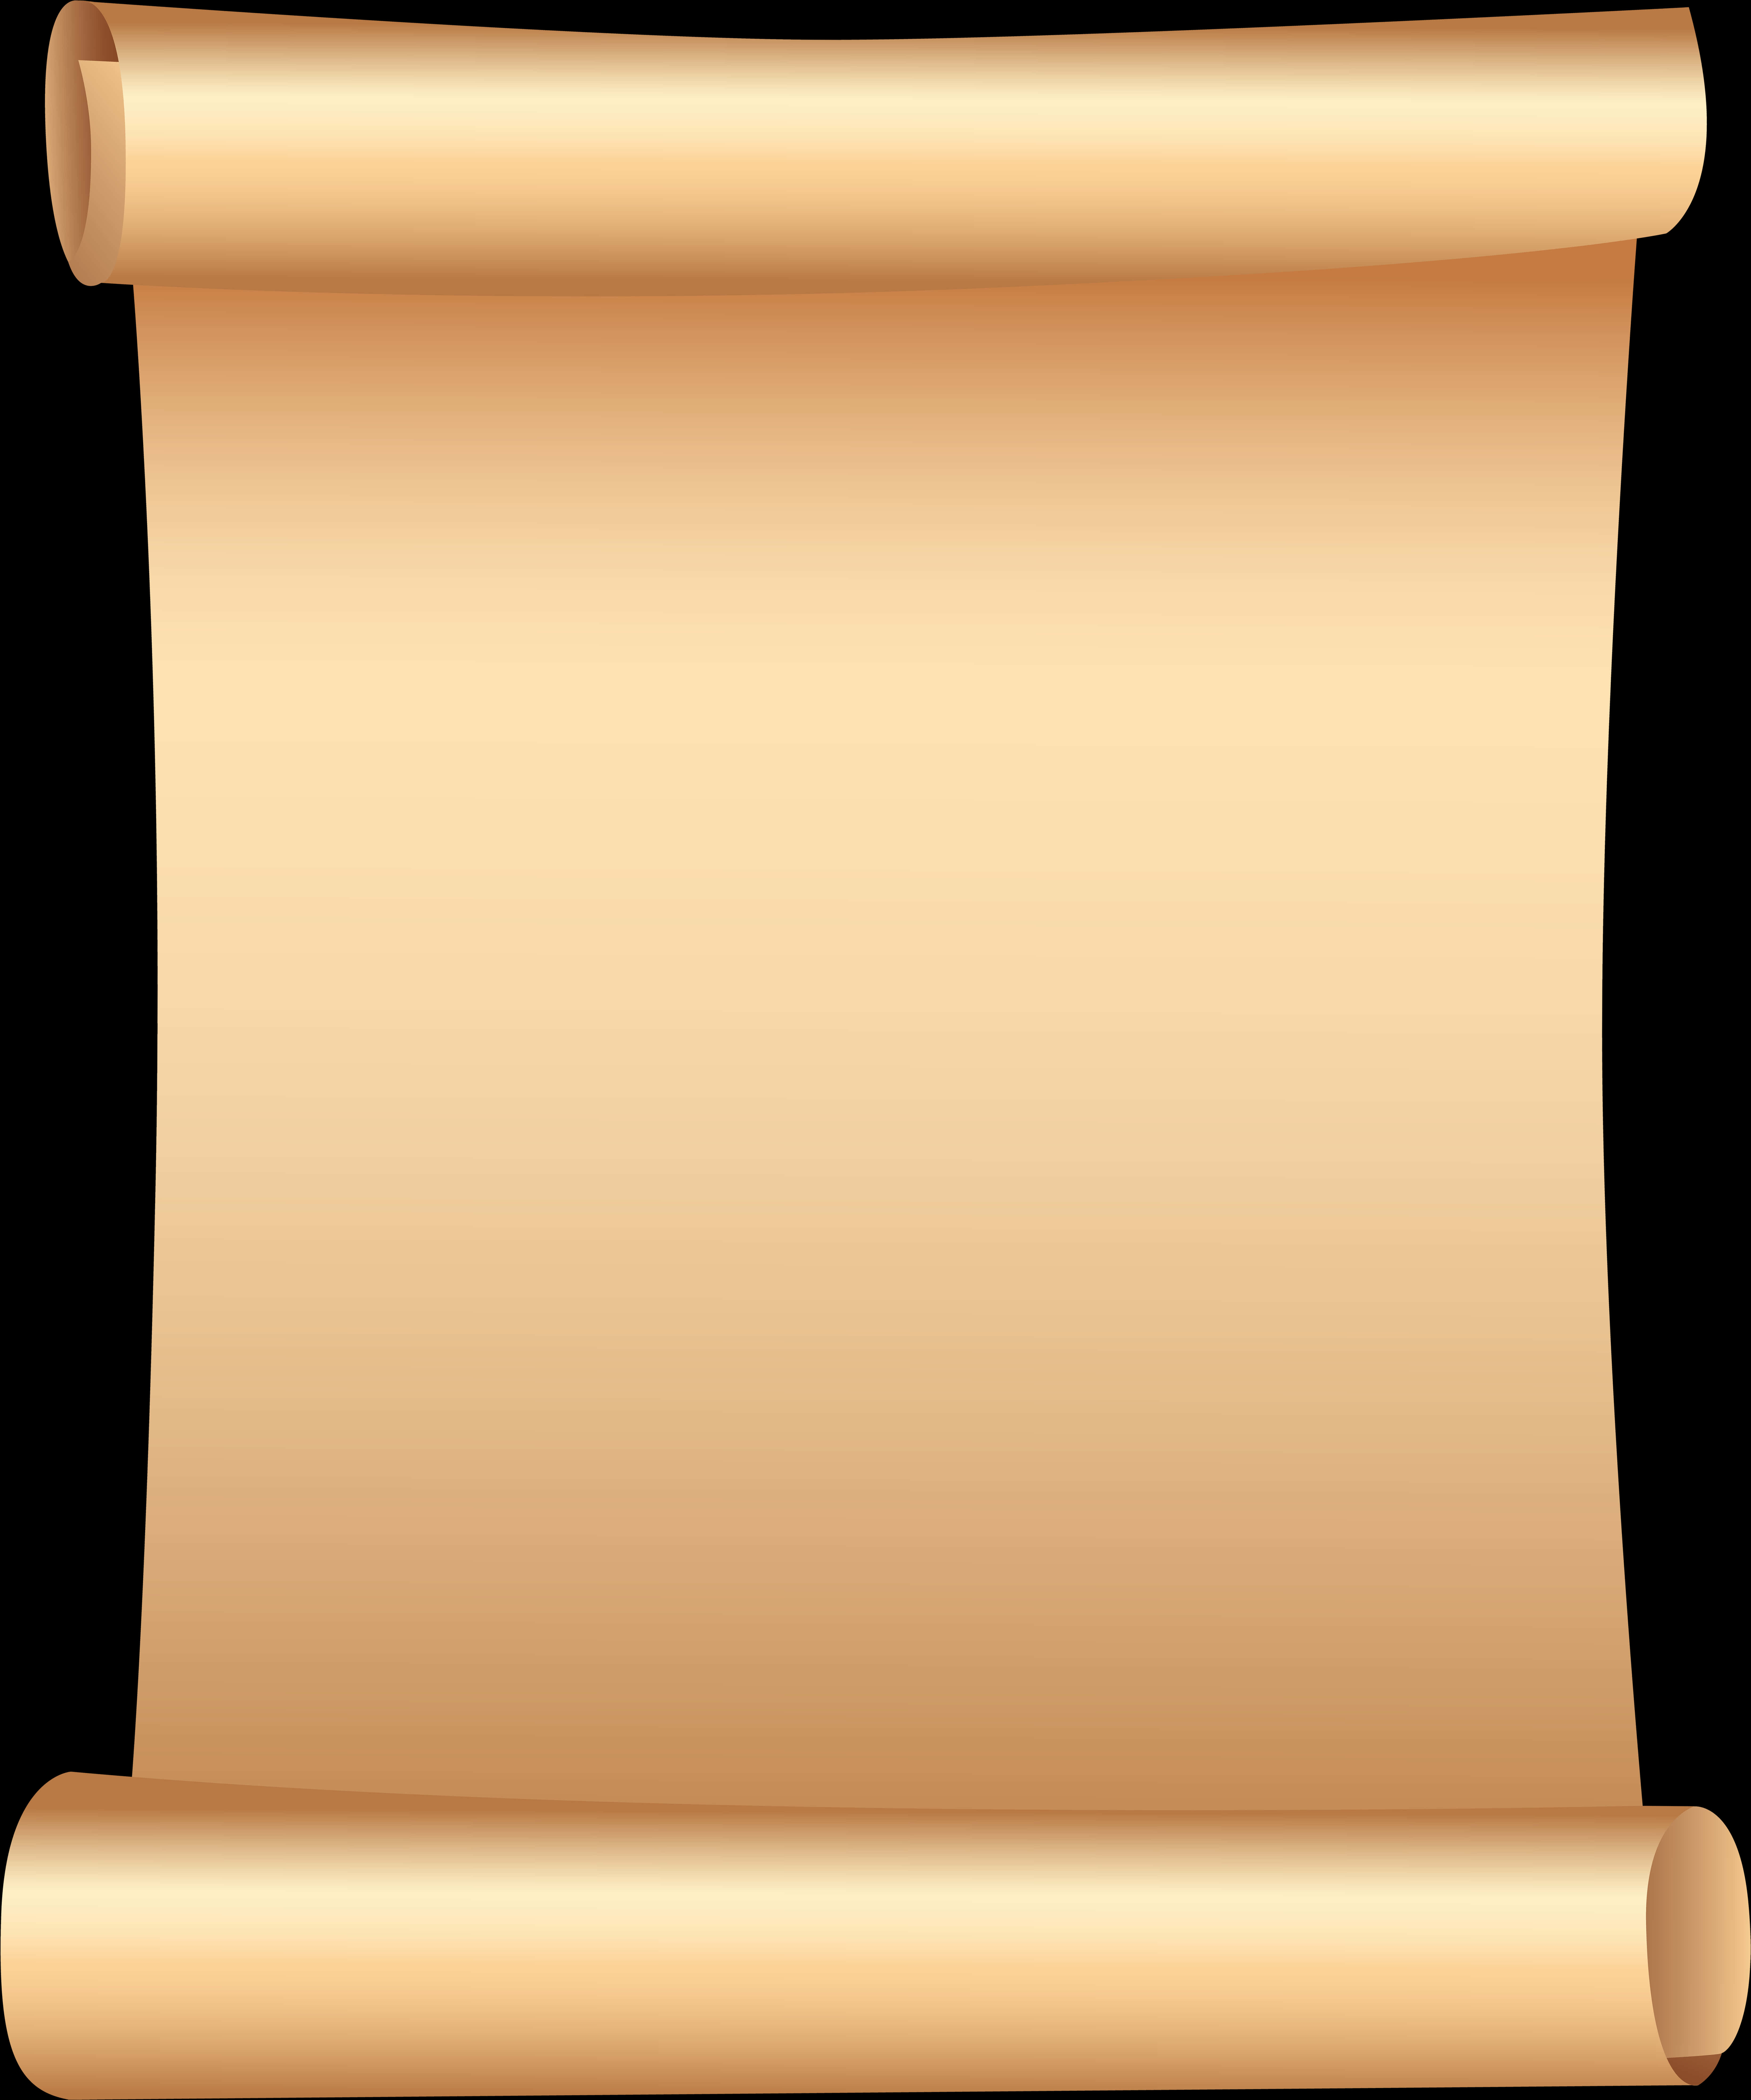 A Scroll Of Paper On A Black Background